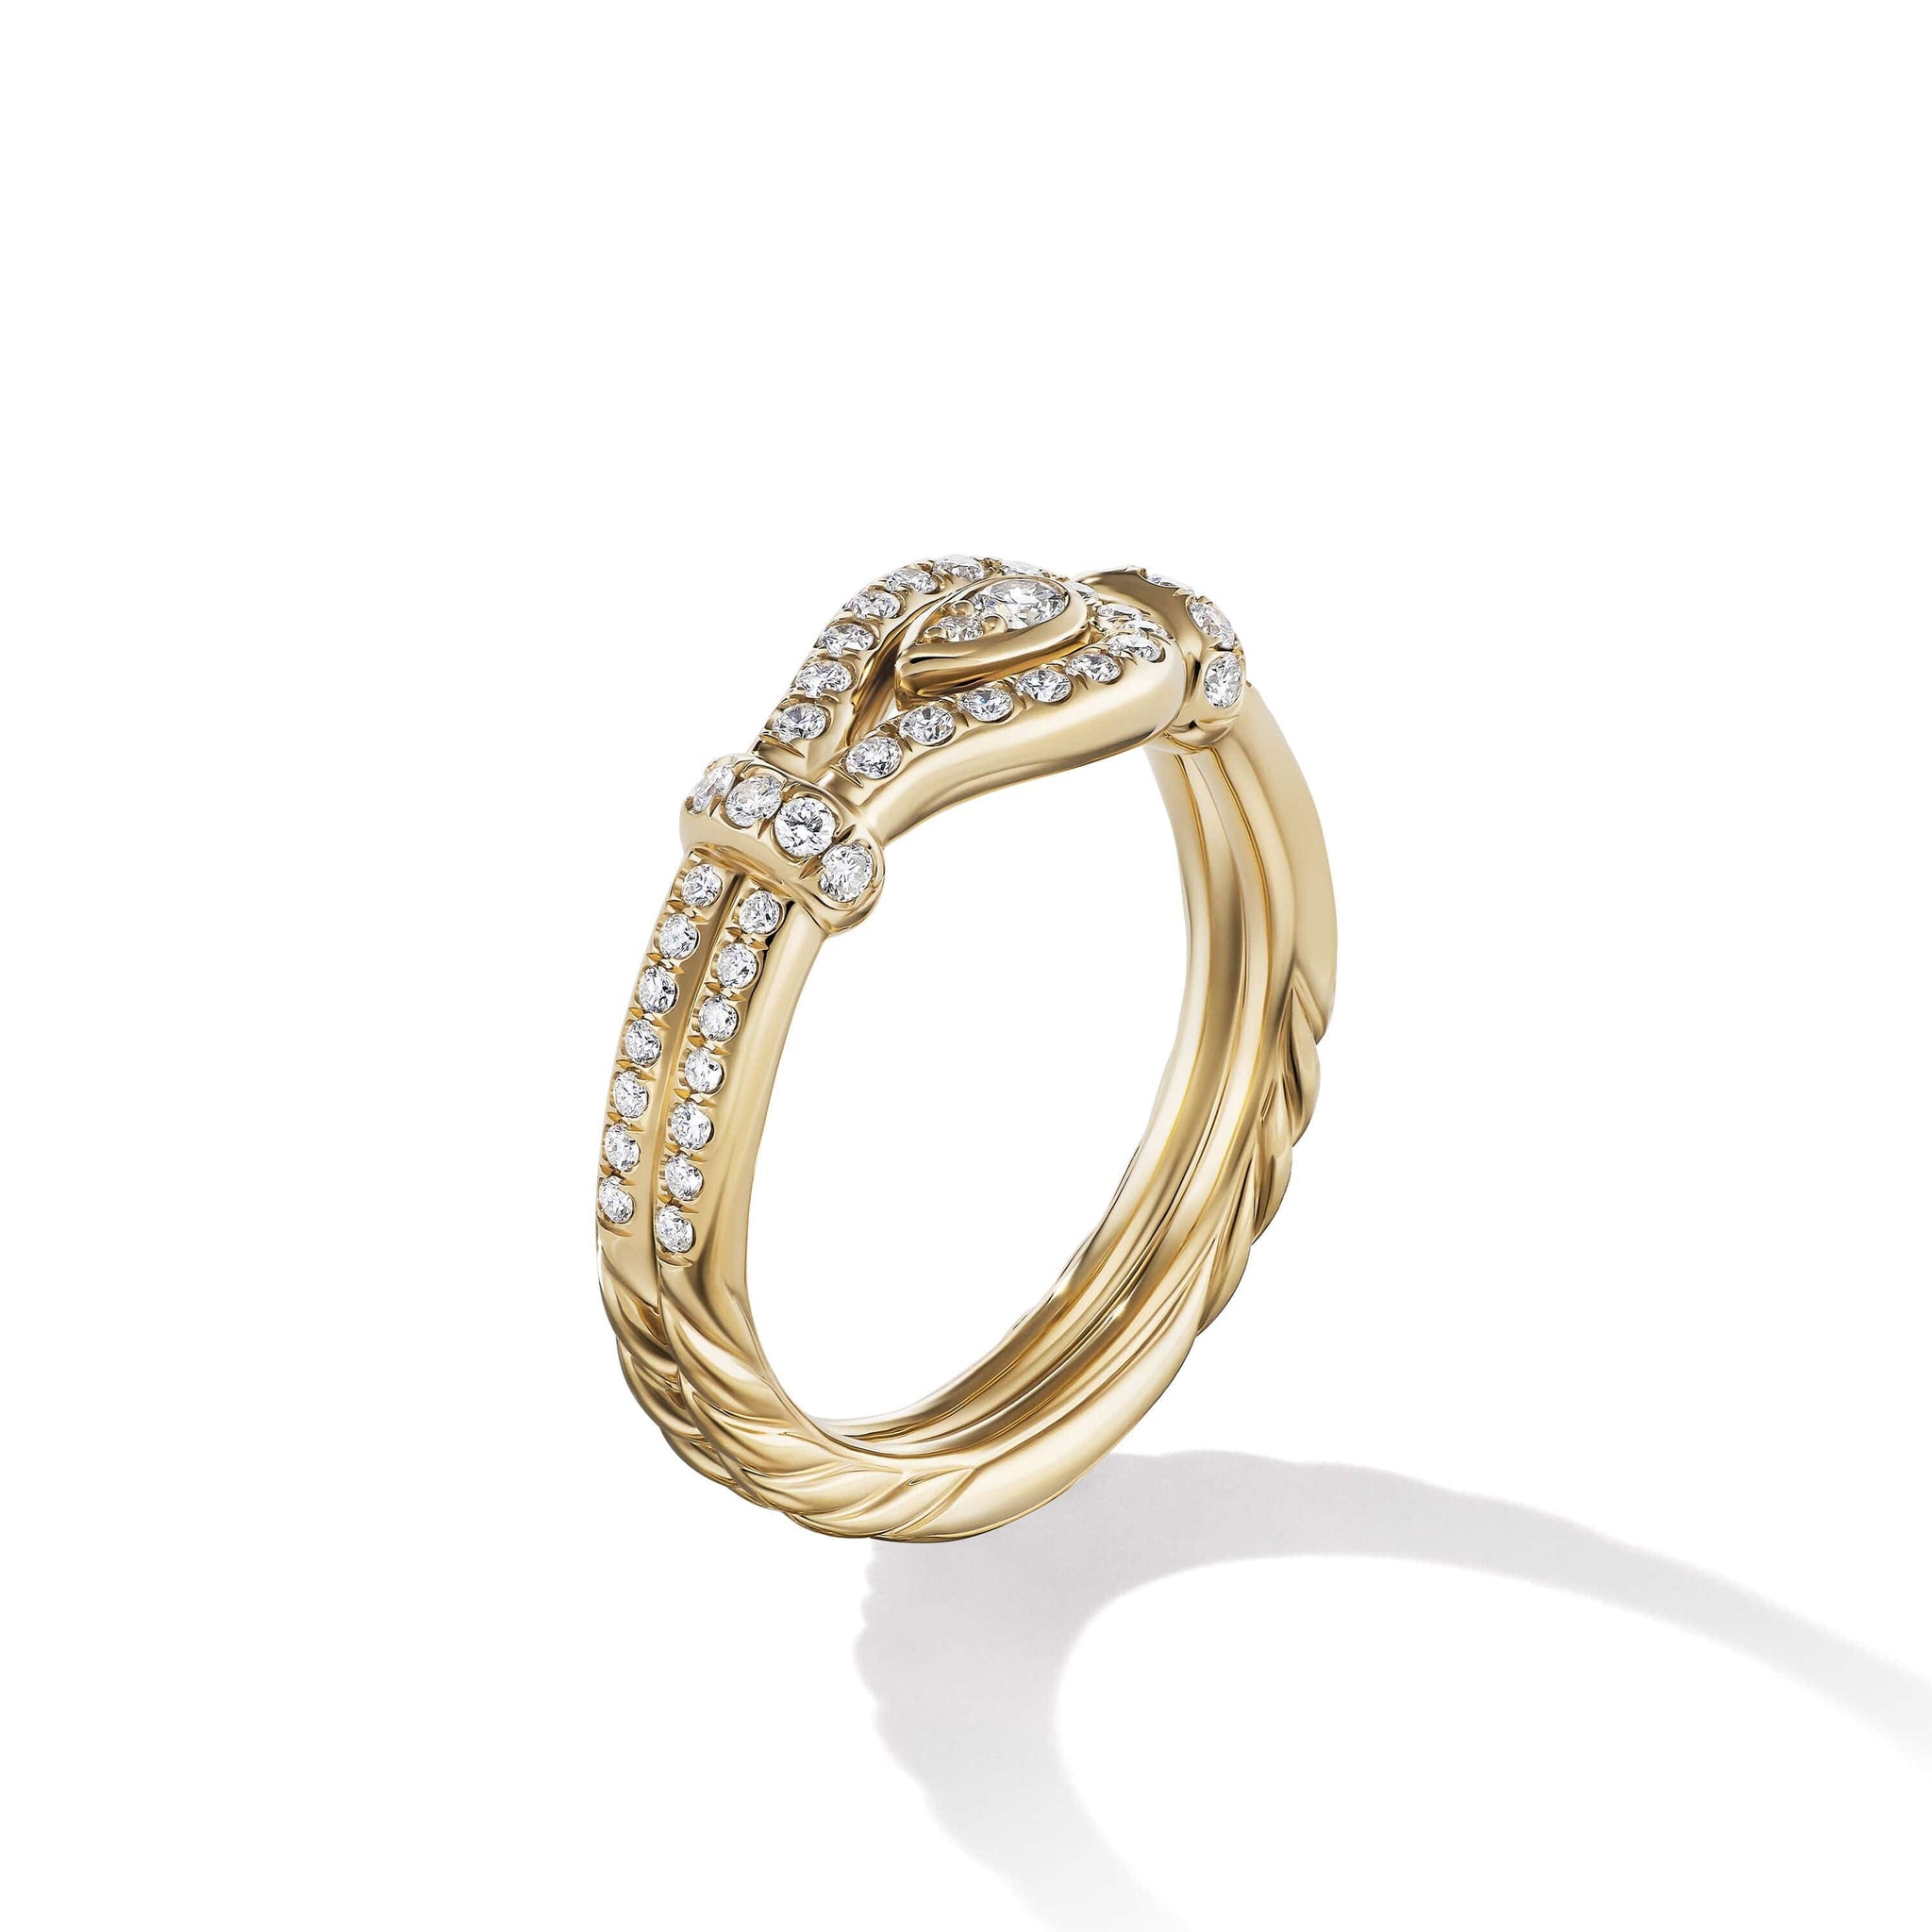 Thoroughbred Loop Ring in 18K Yellow Gold with Full Pavé Diamonds